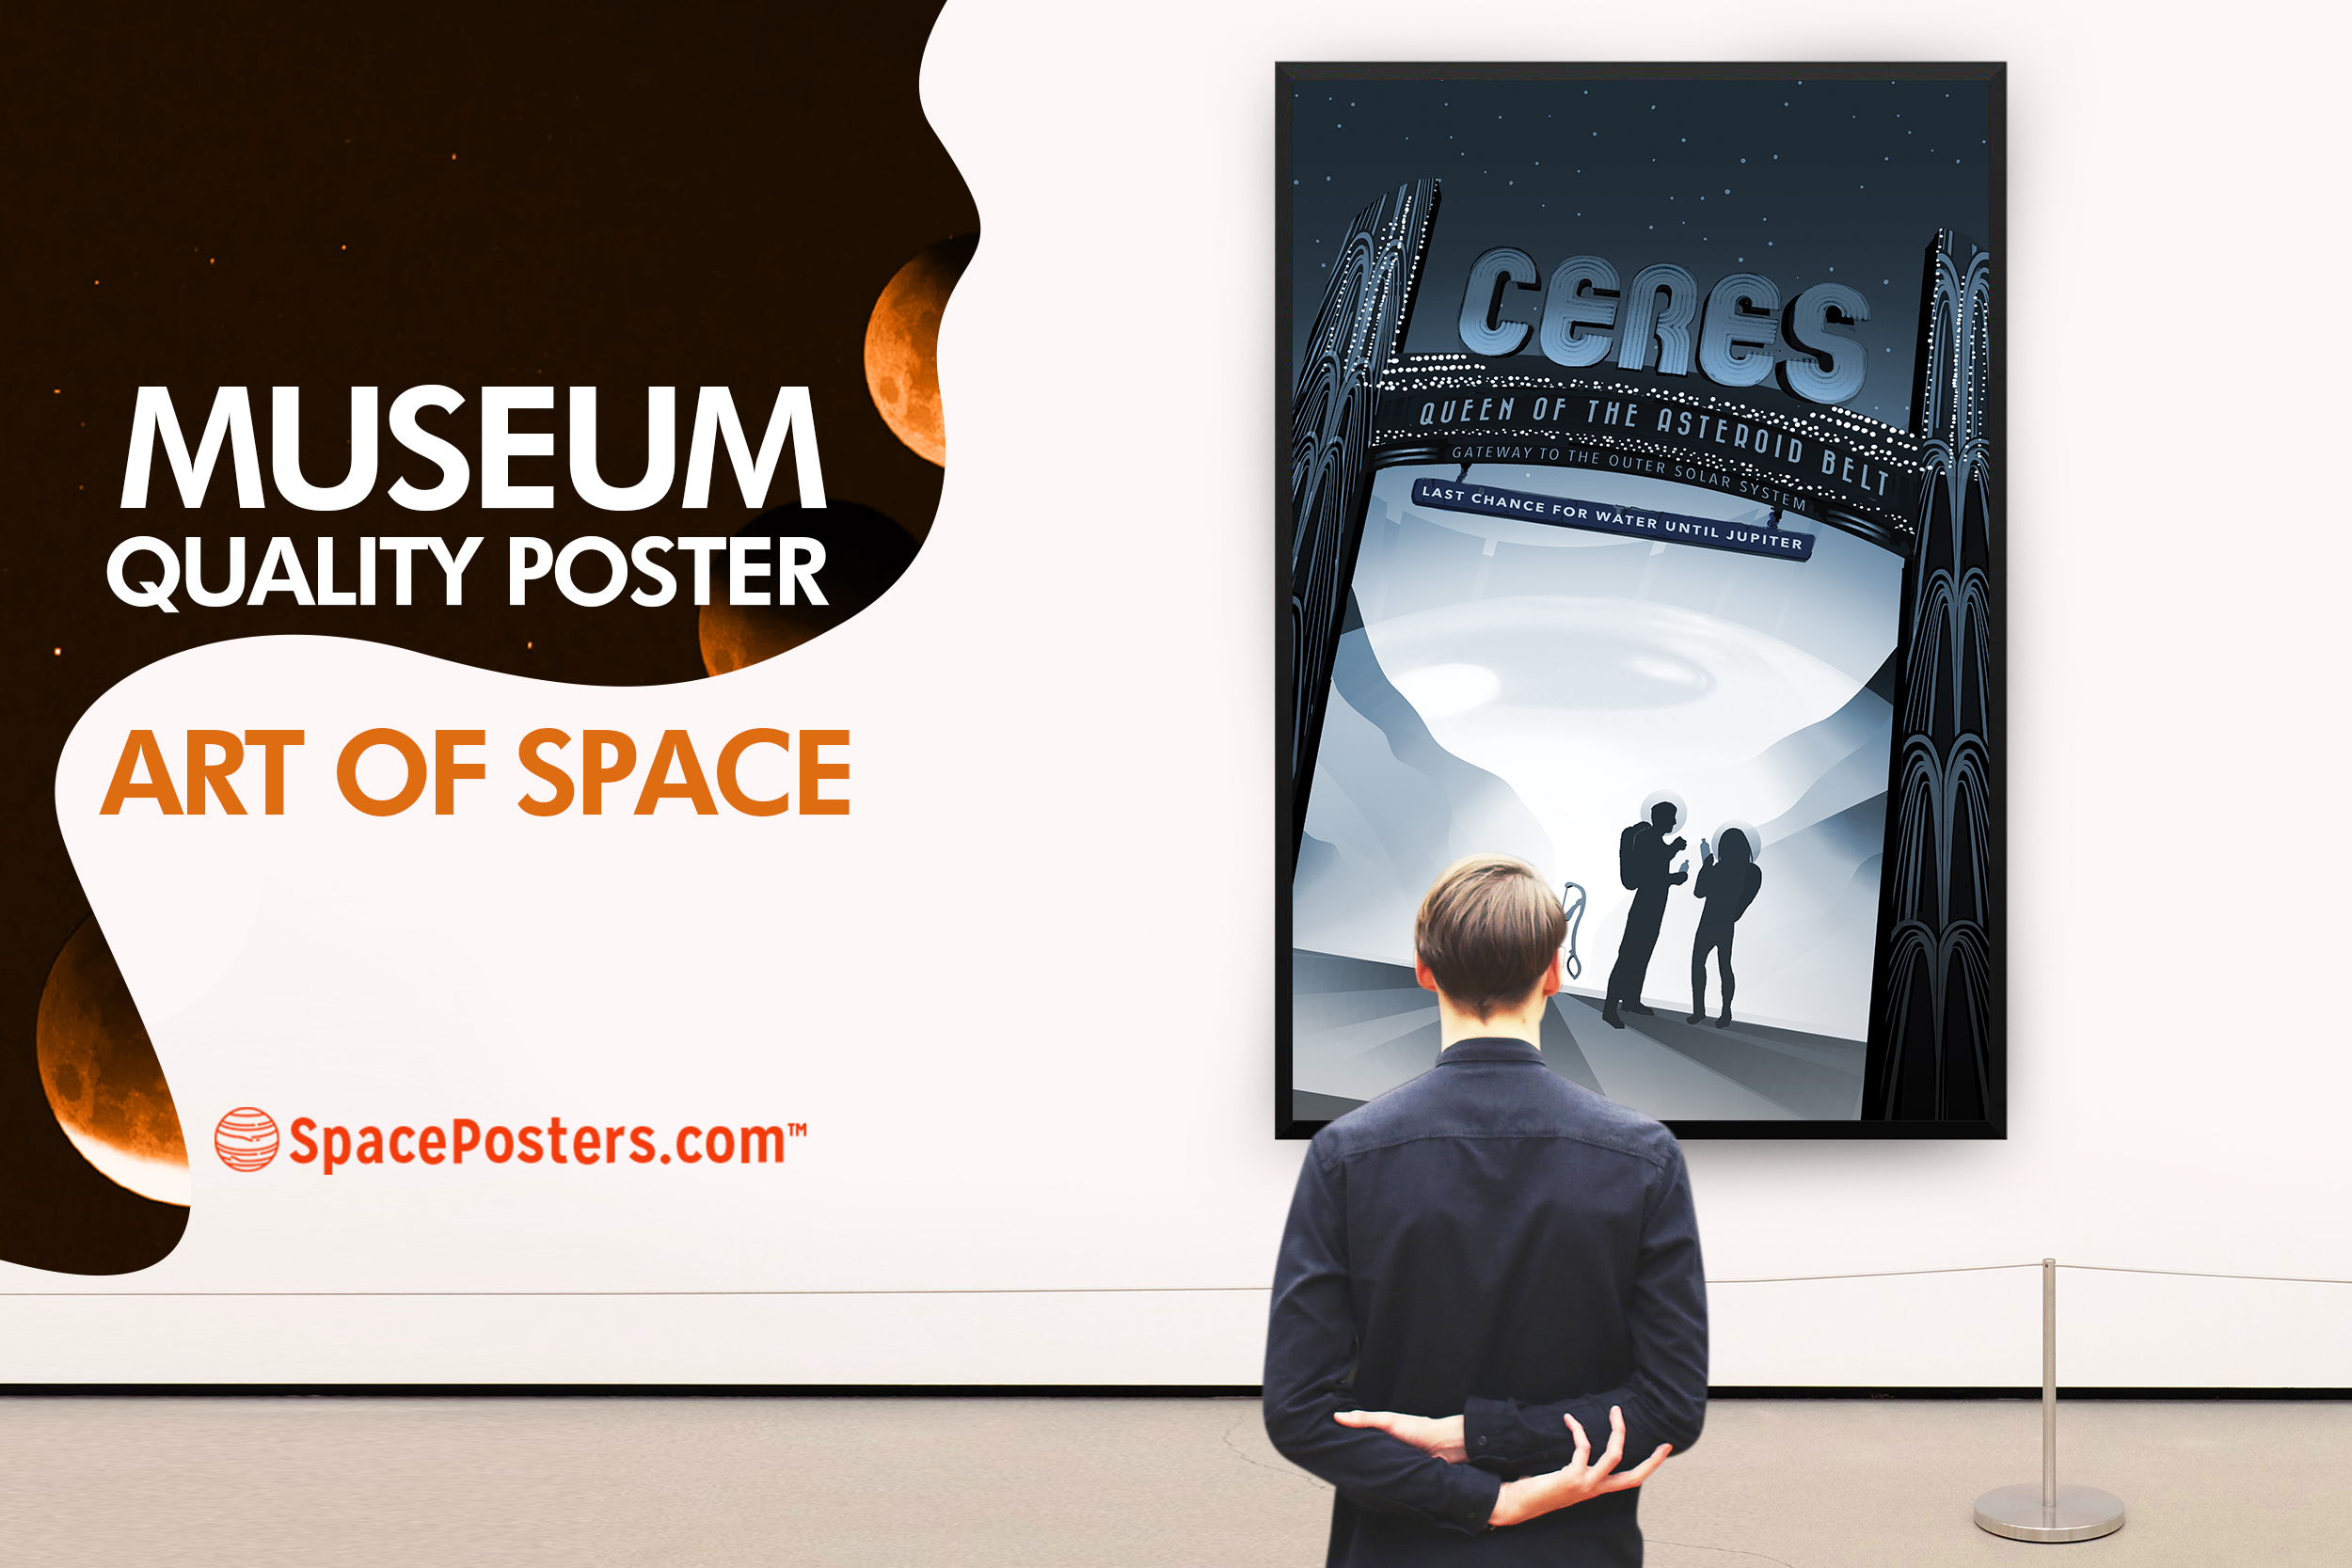 Space Posters is bringing the galaxy closer than ever before.